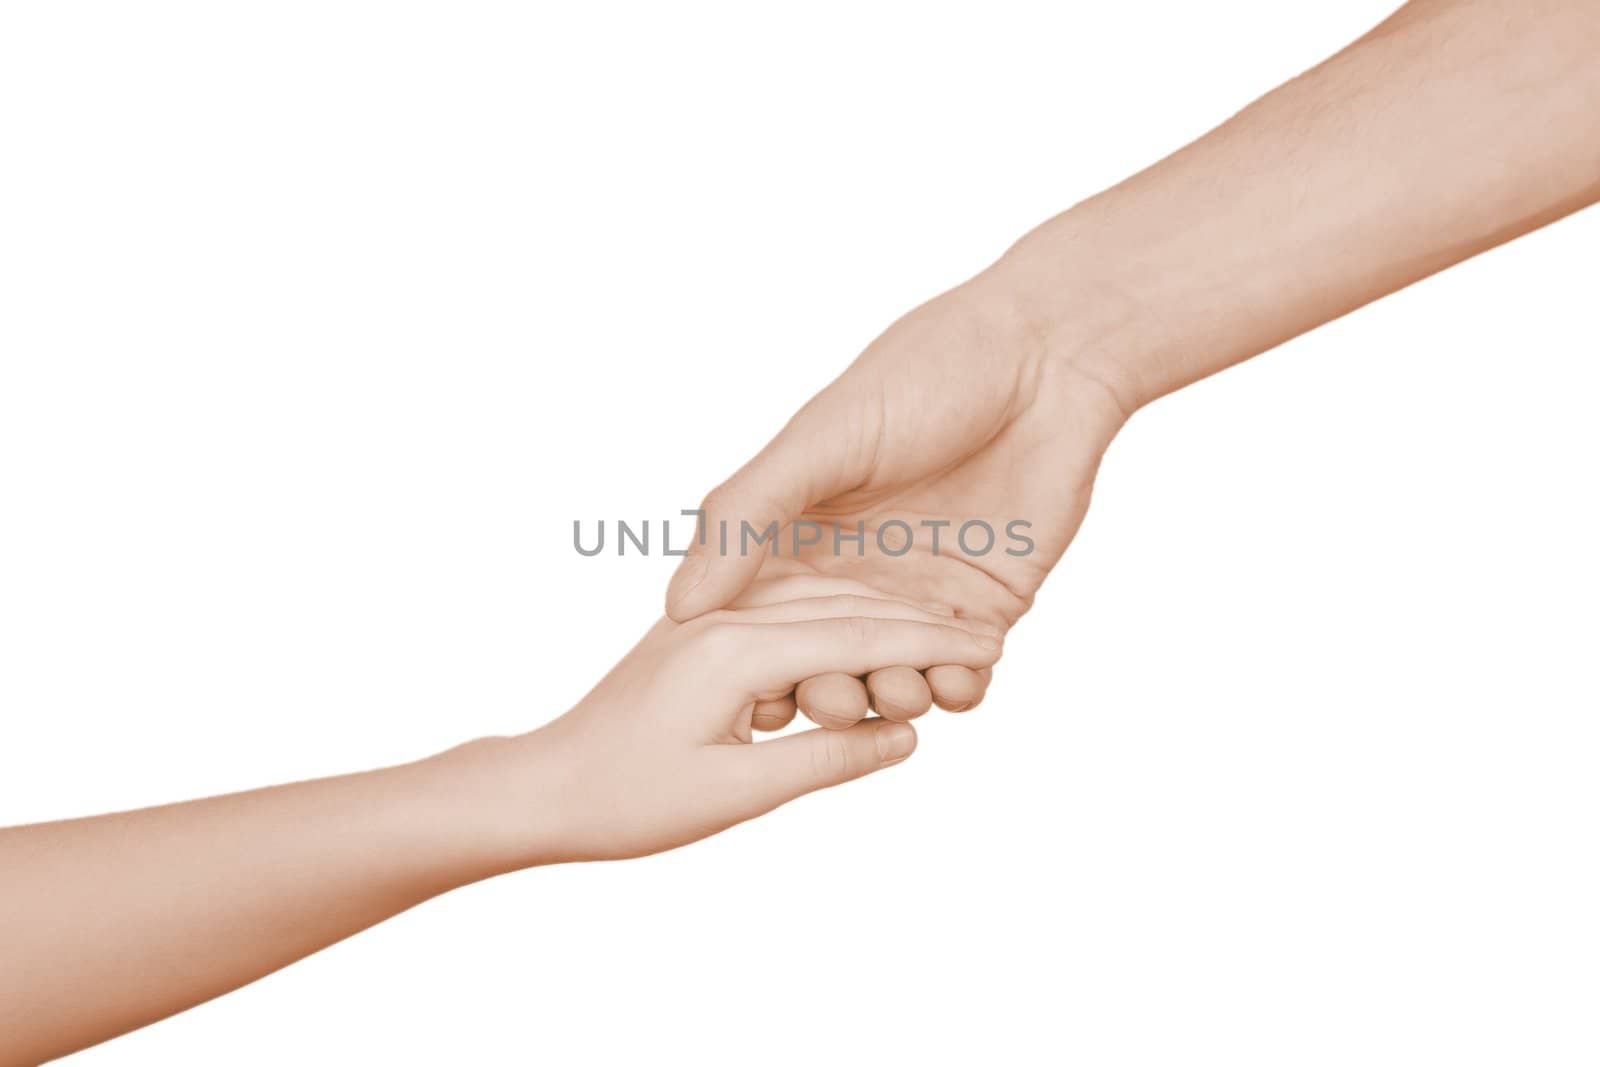 The man's hand holds a hand of the child on a white background